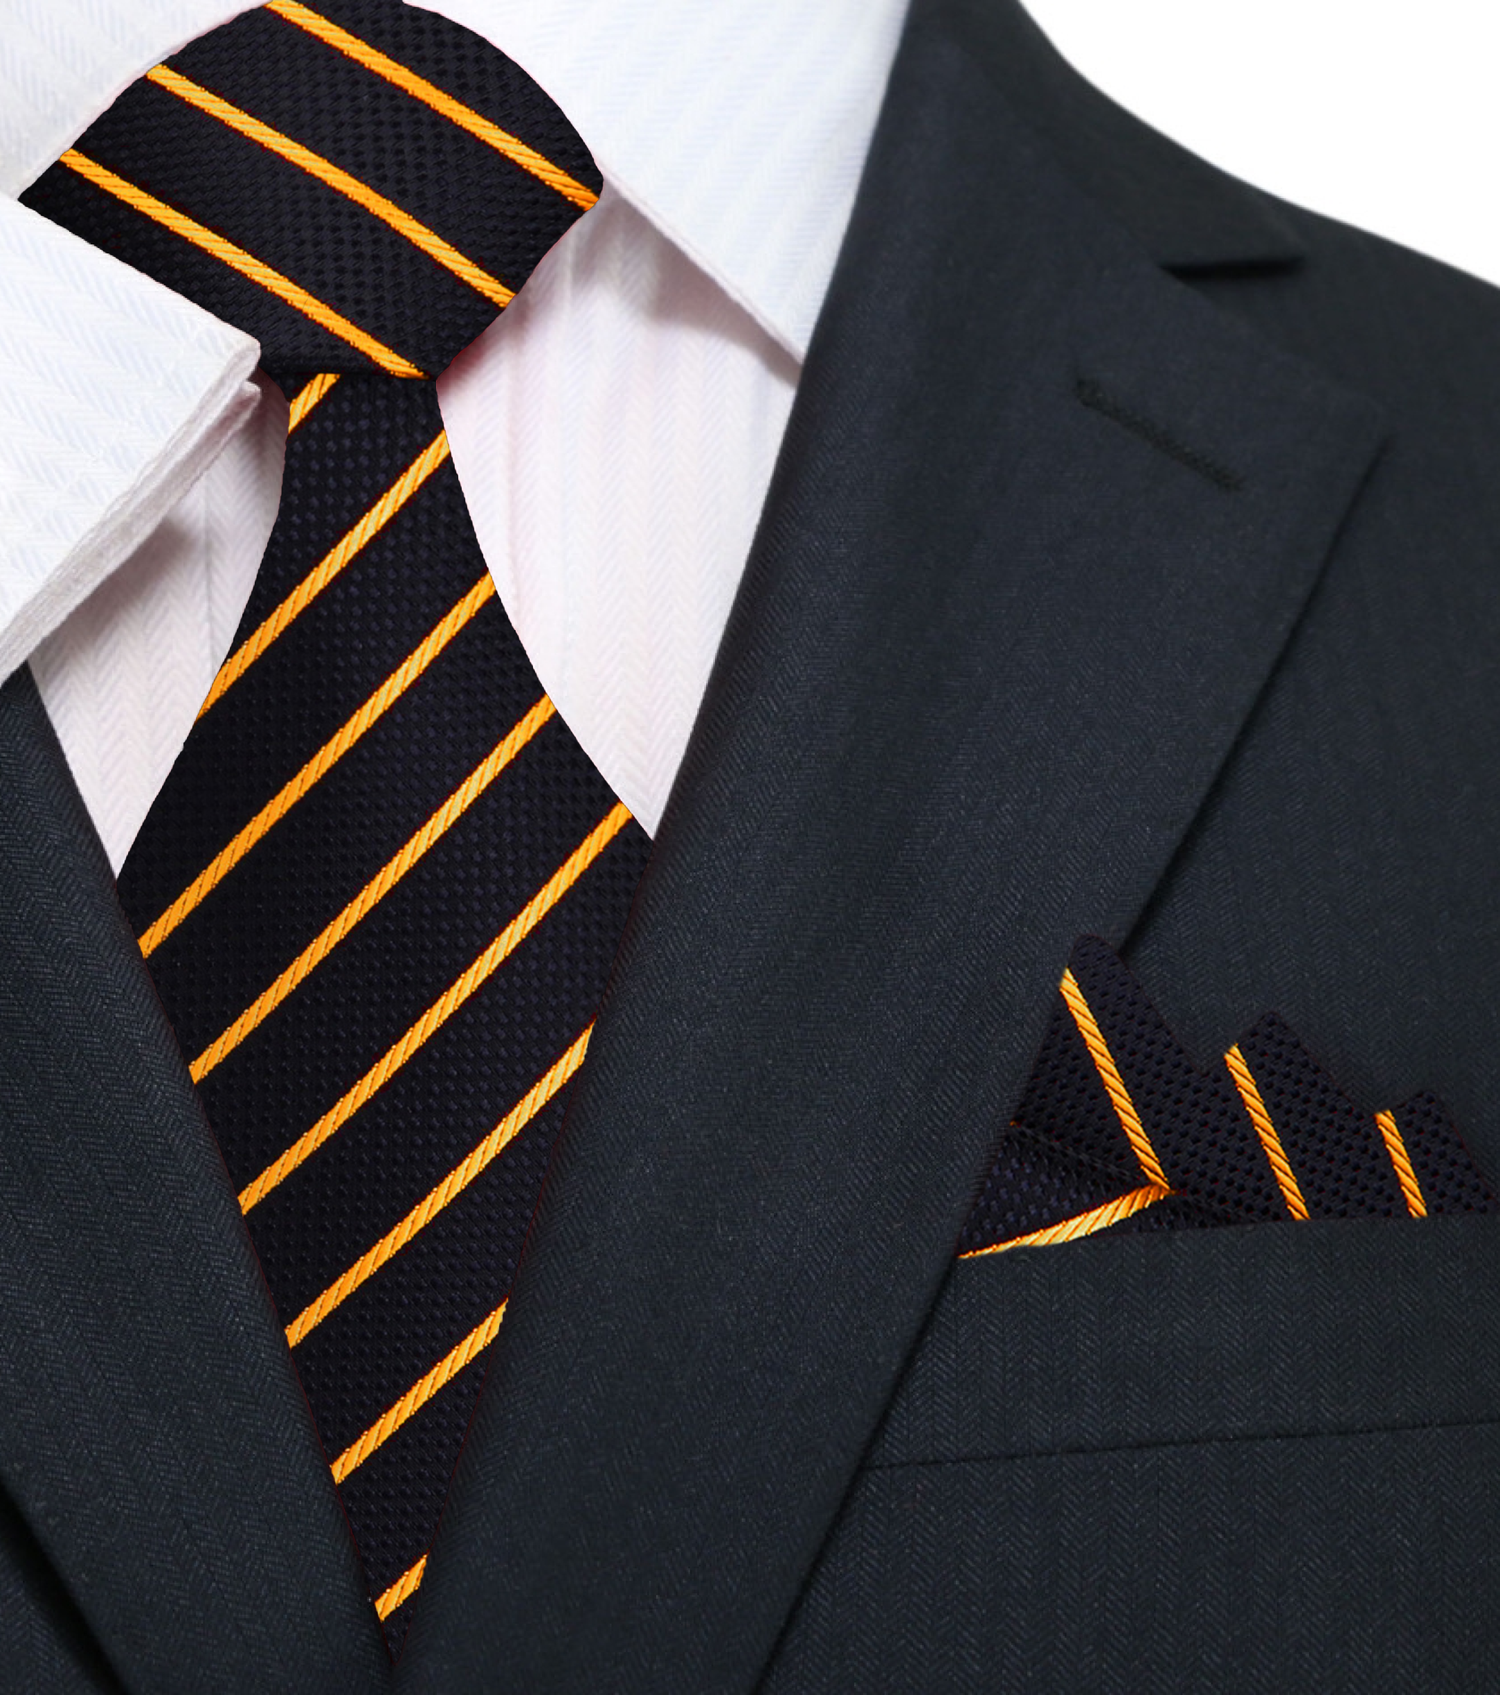 Black, Gold Stripe Necktie and Matching Square